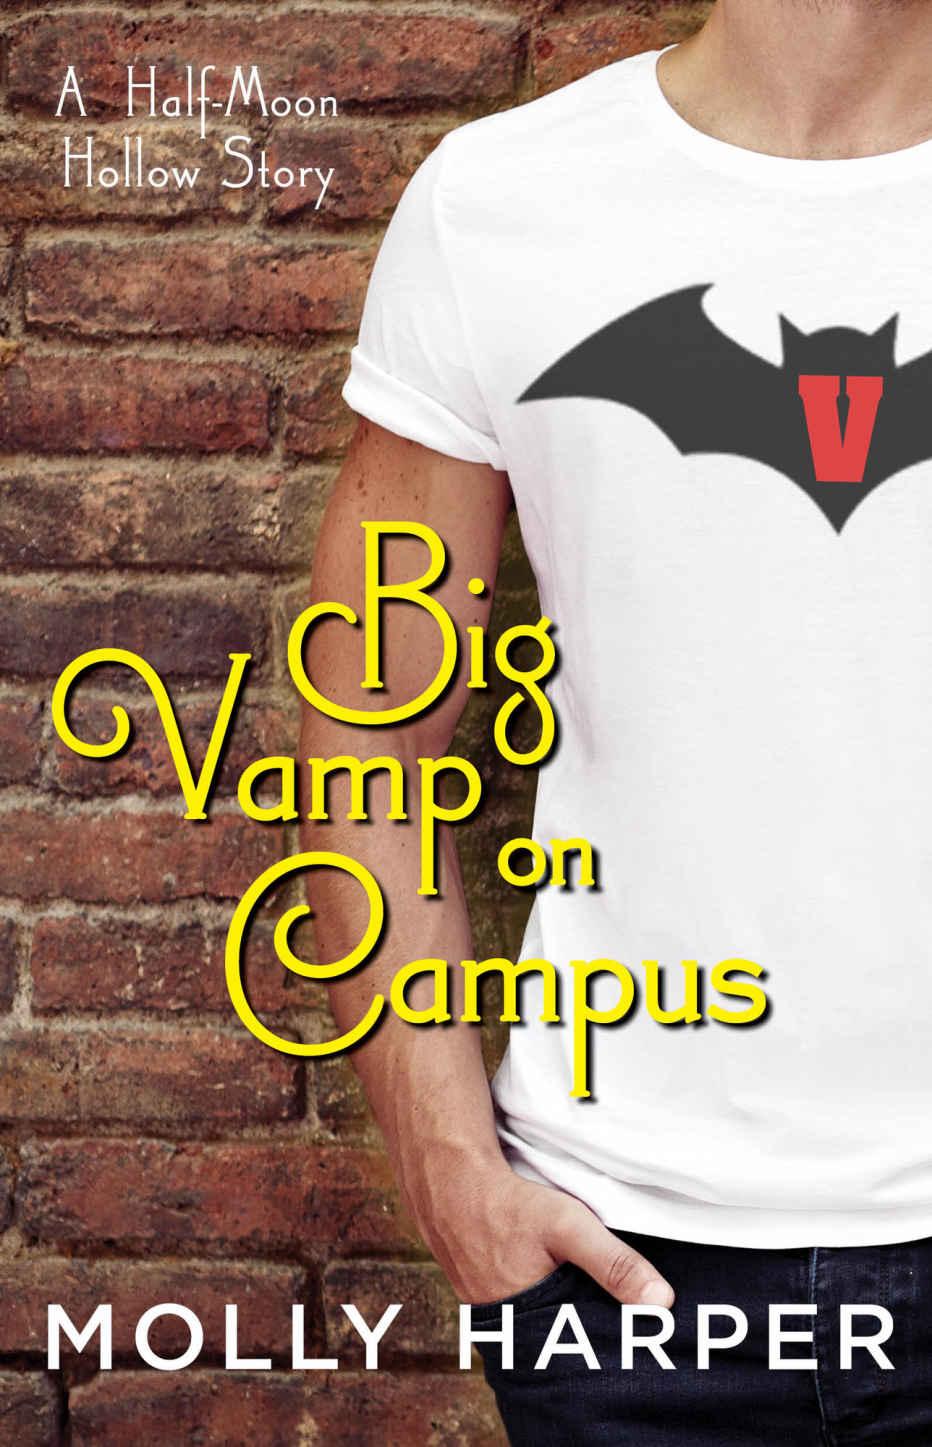 Big Vamp on Campus (Half-Moon Hollow Series Book 7) by Molly Harper